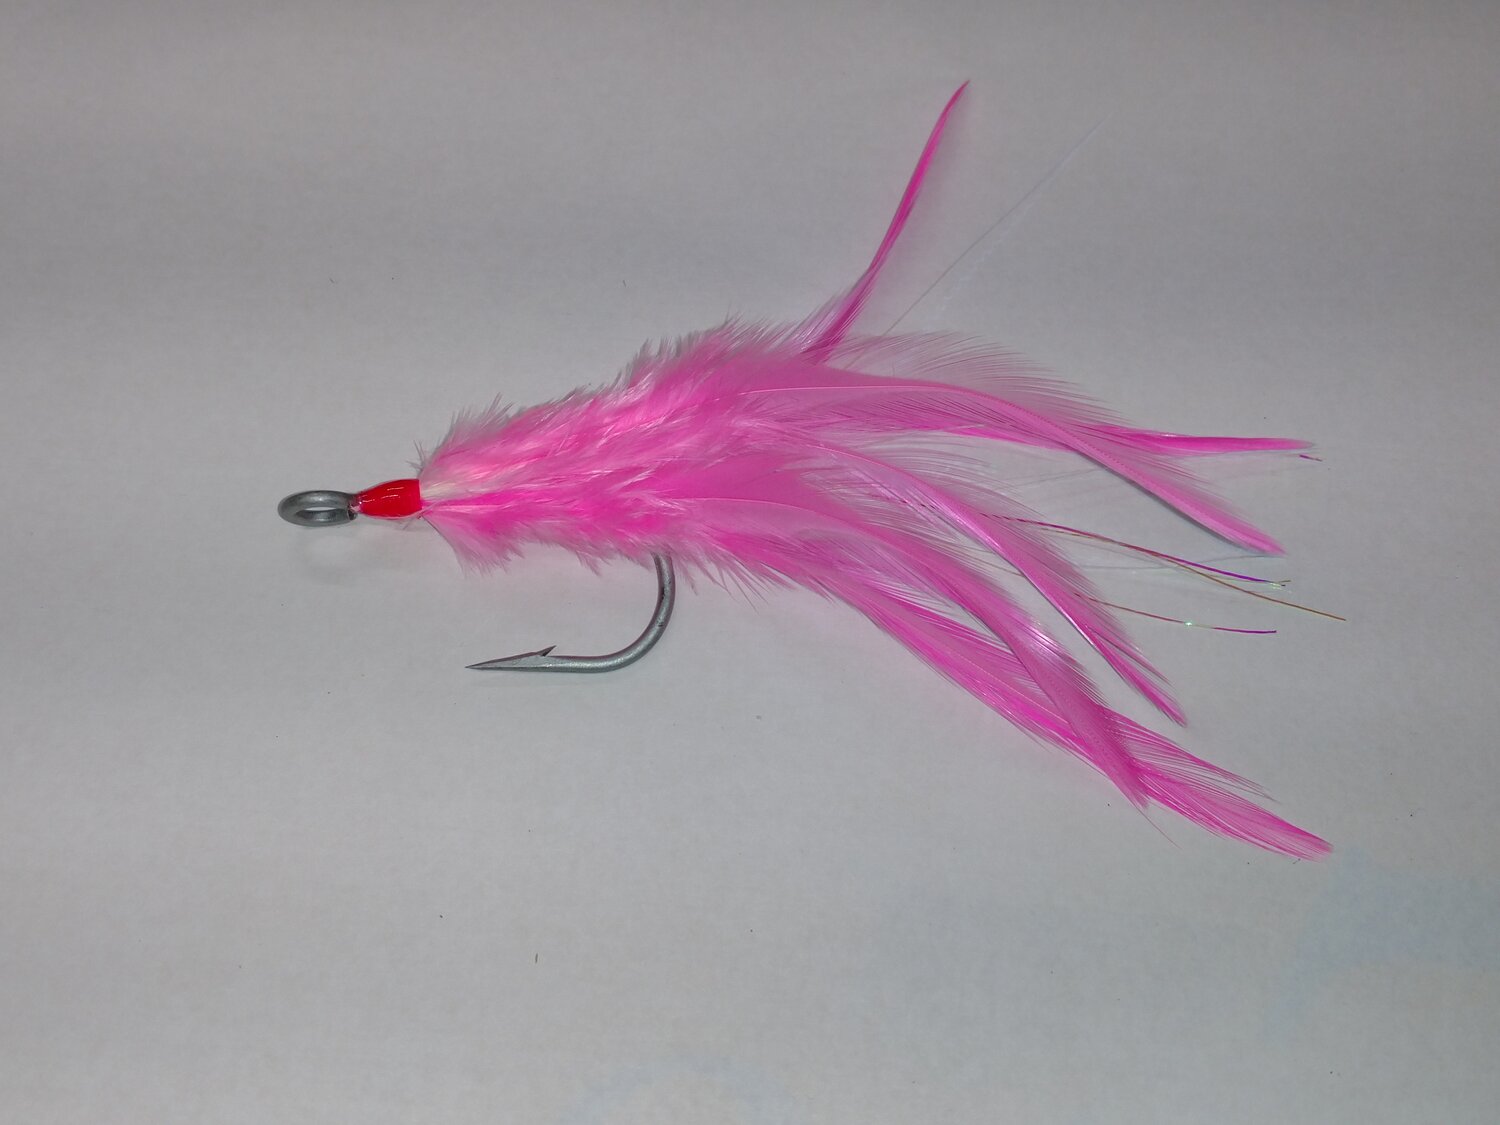 Feather Fishing Hooks - Flash Teaser Hook Feather Dressed Strong Round